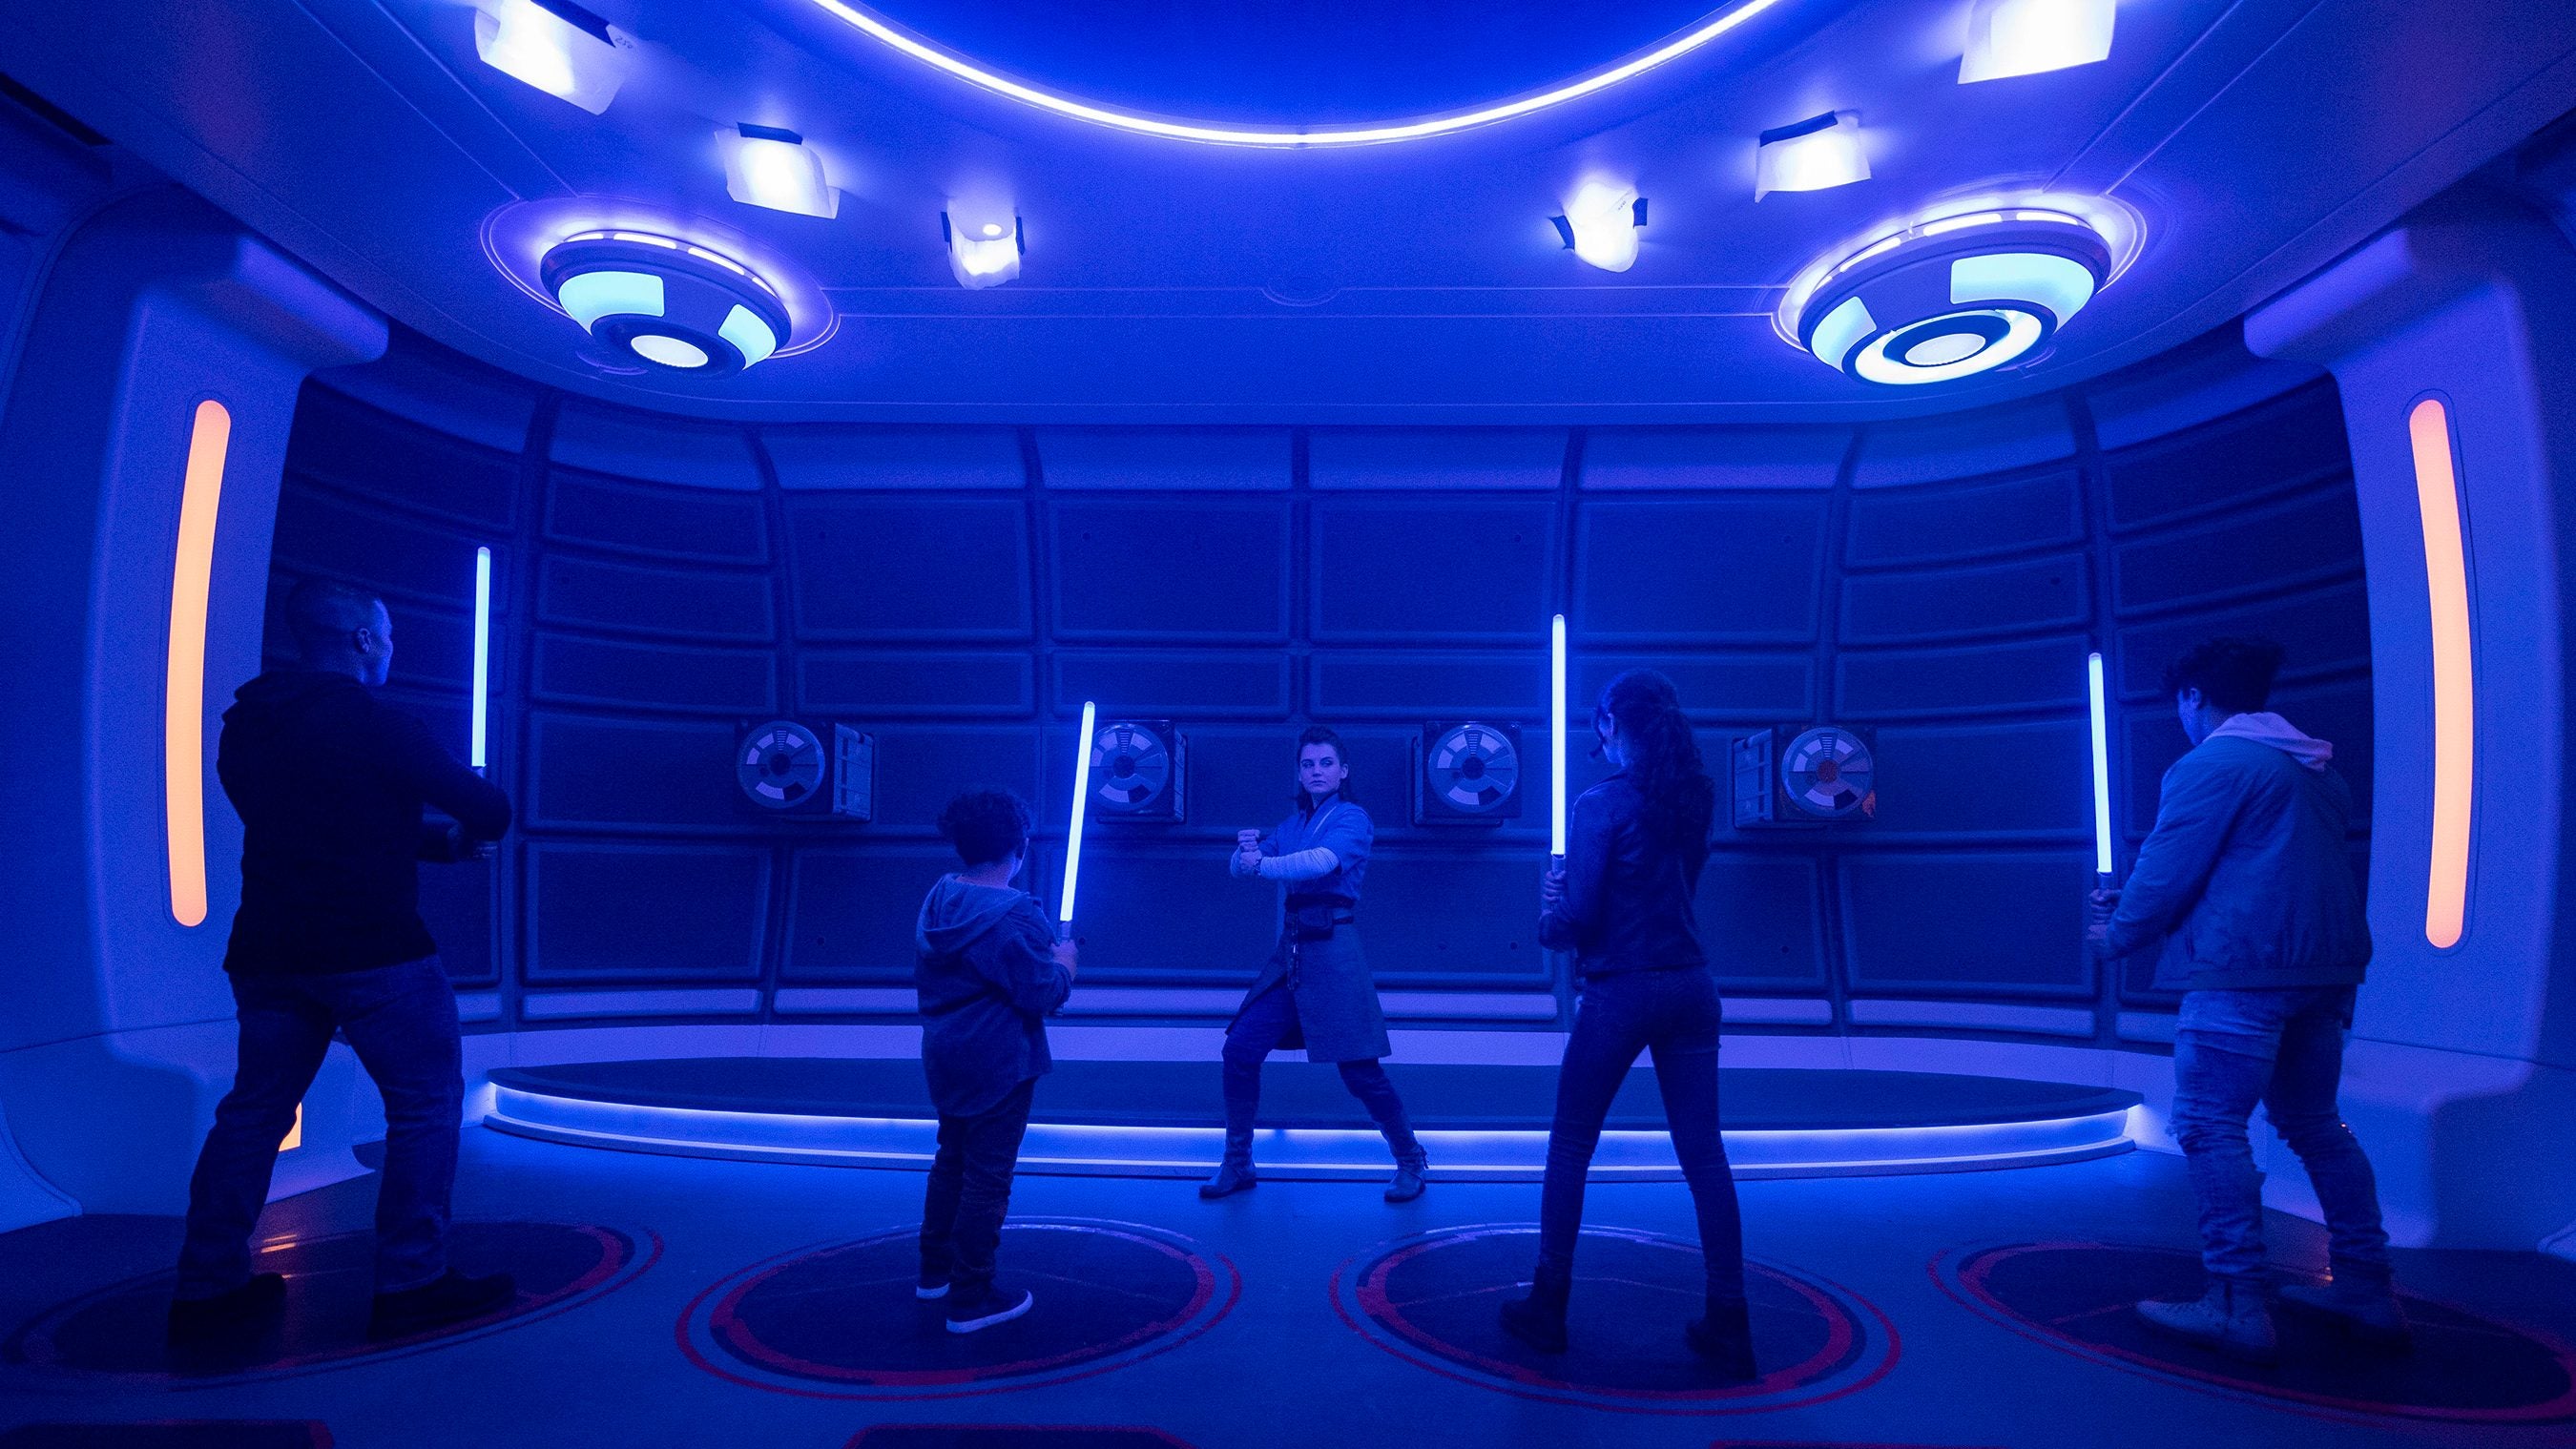 Light saber training was included in the experience